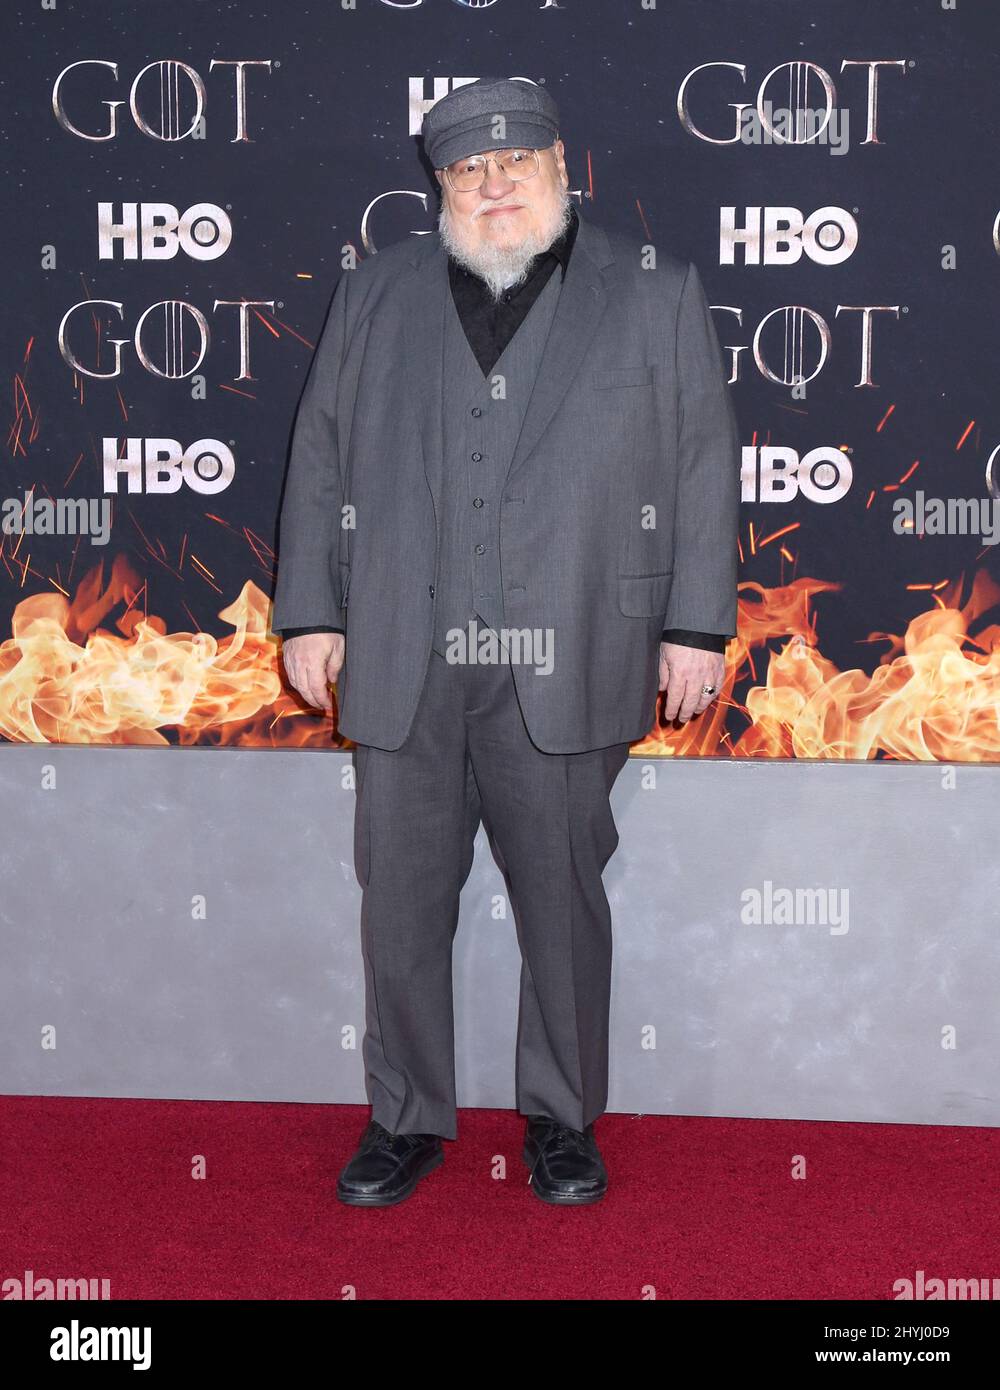 George R. R. Martin attending the 'Game of Thrones' Final Season World Premiere held at Radio City Music Hall on April 3, 2019 in New York City. Stock Photo